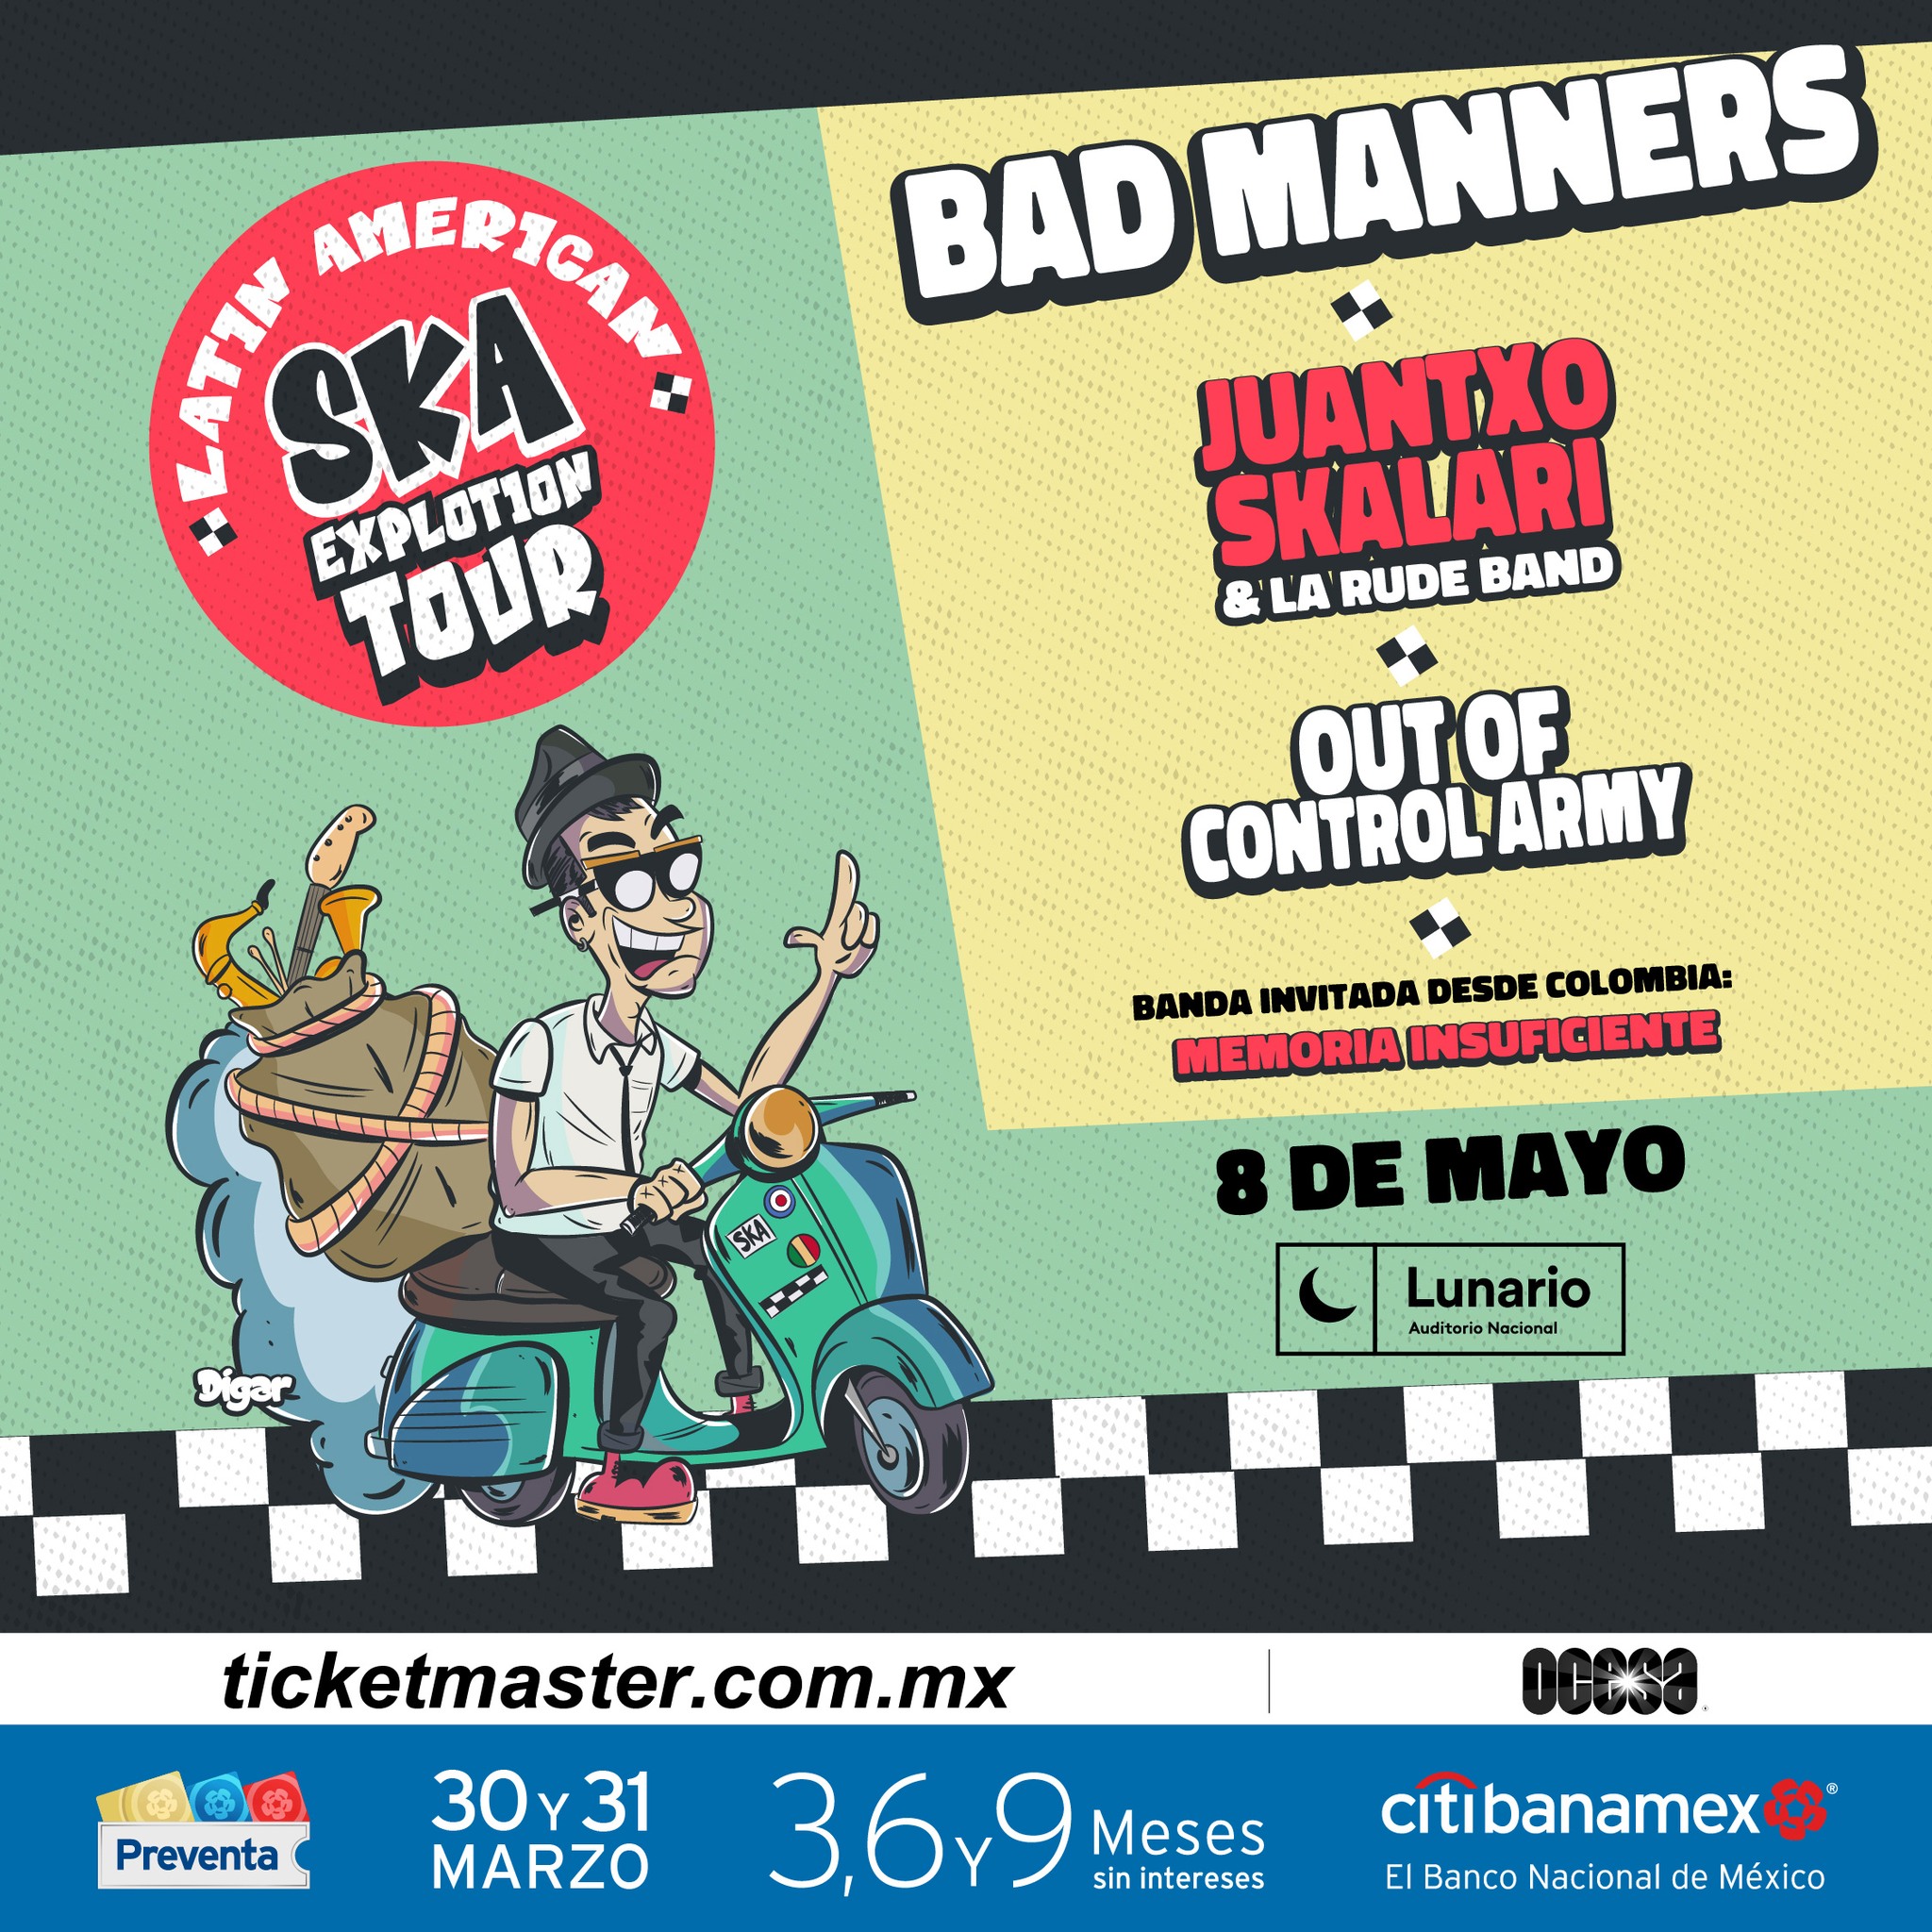 Bad manners poster_2022